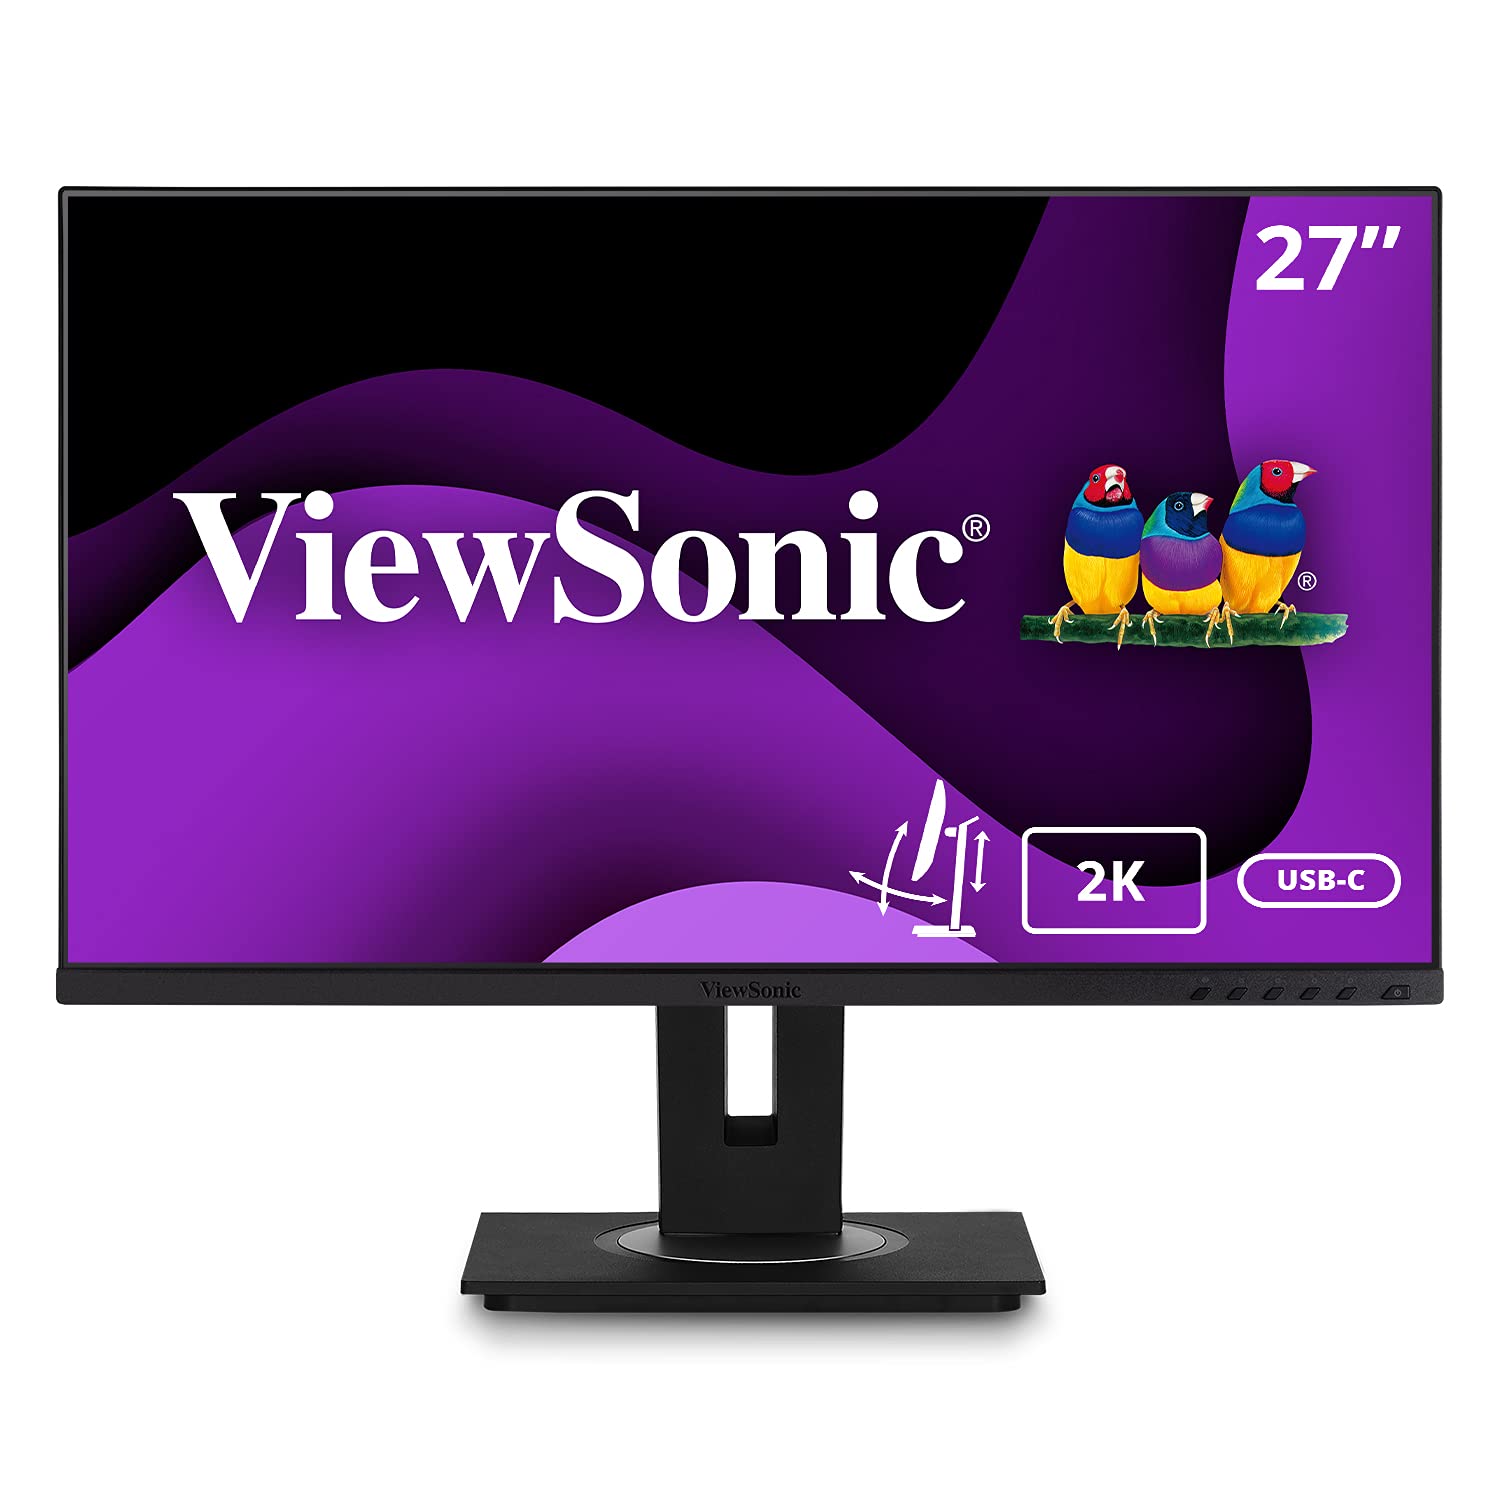 ViewSonic VG2755-2K 24 Inch IPS 1440p Monitor with USB C 3.1, HDMI, DisplayPort and 40 Degree Tilt Ergonomics for Home and Office,Black